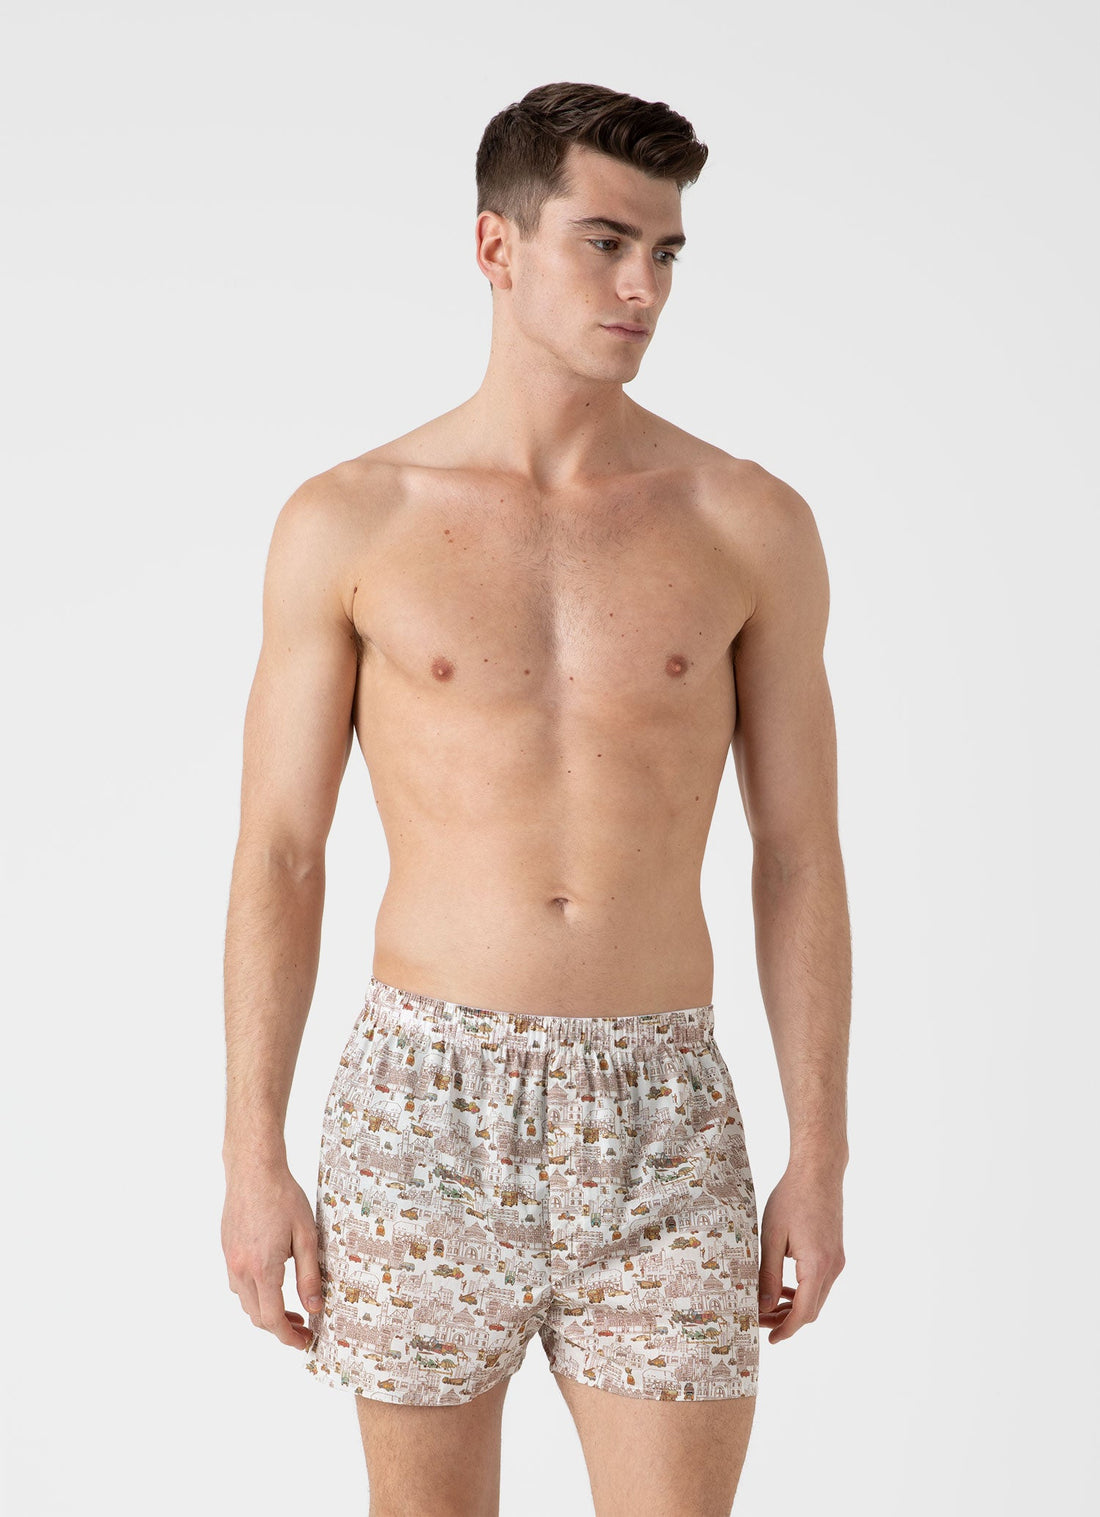 Men's Classic Boxer Shorts in Liberty Fabric in London's Calling